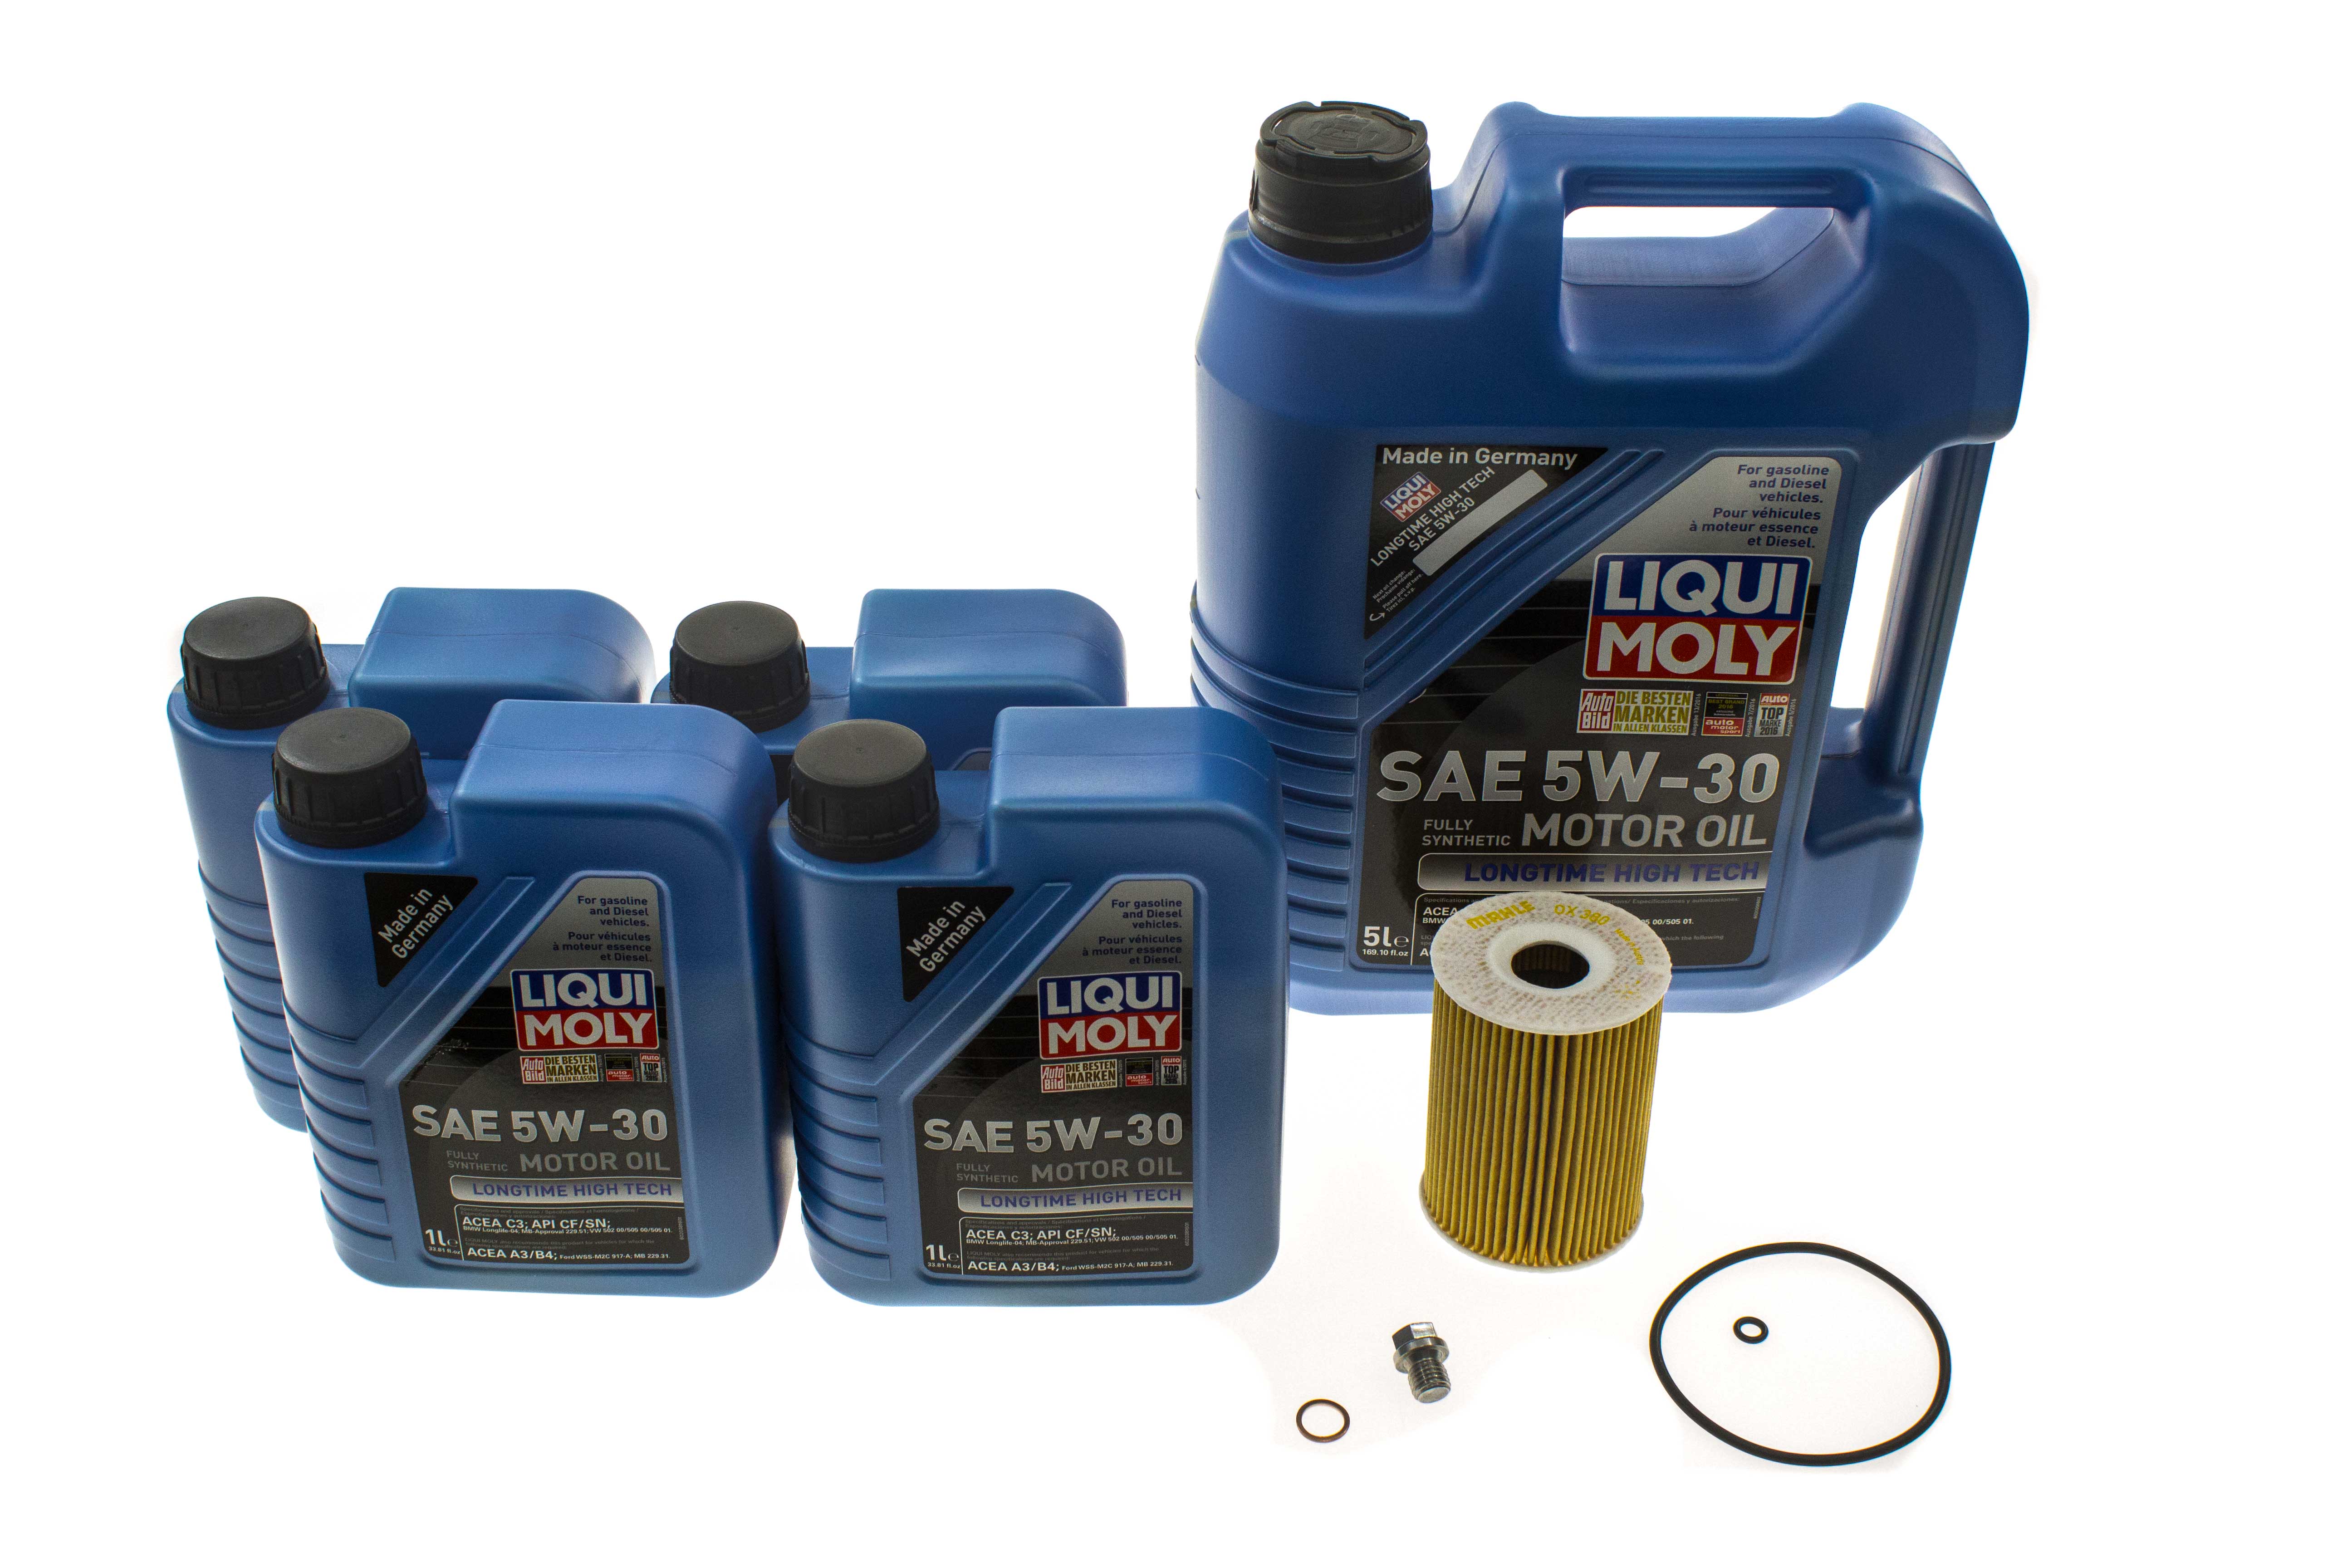 Liqui Moly Fully Synthetic Longtime High Tech 5W-30 Motor Oil - 1 Liter